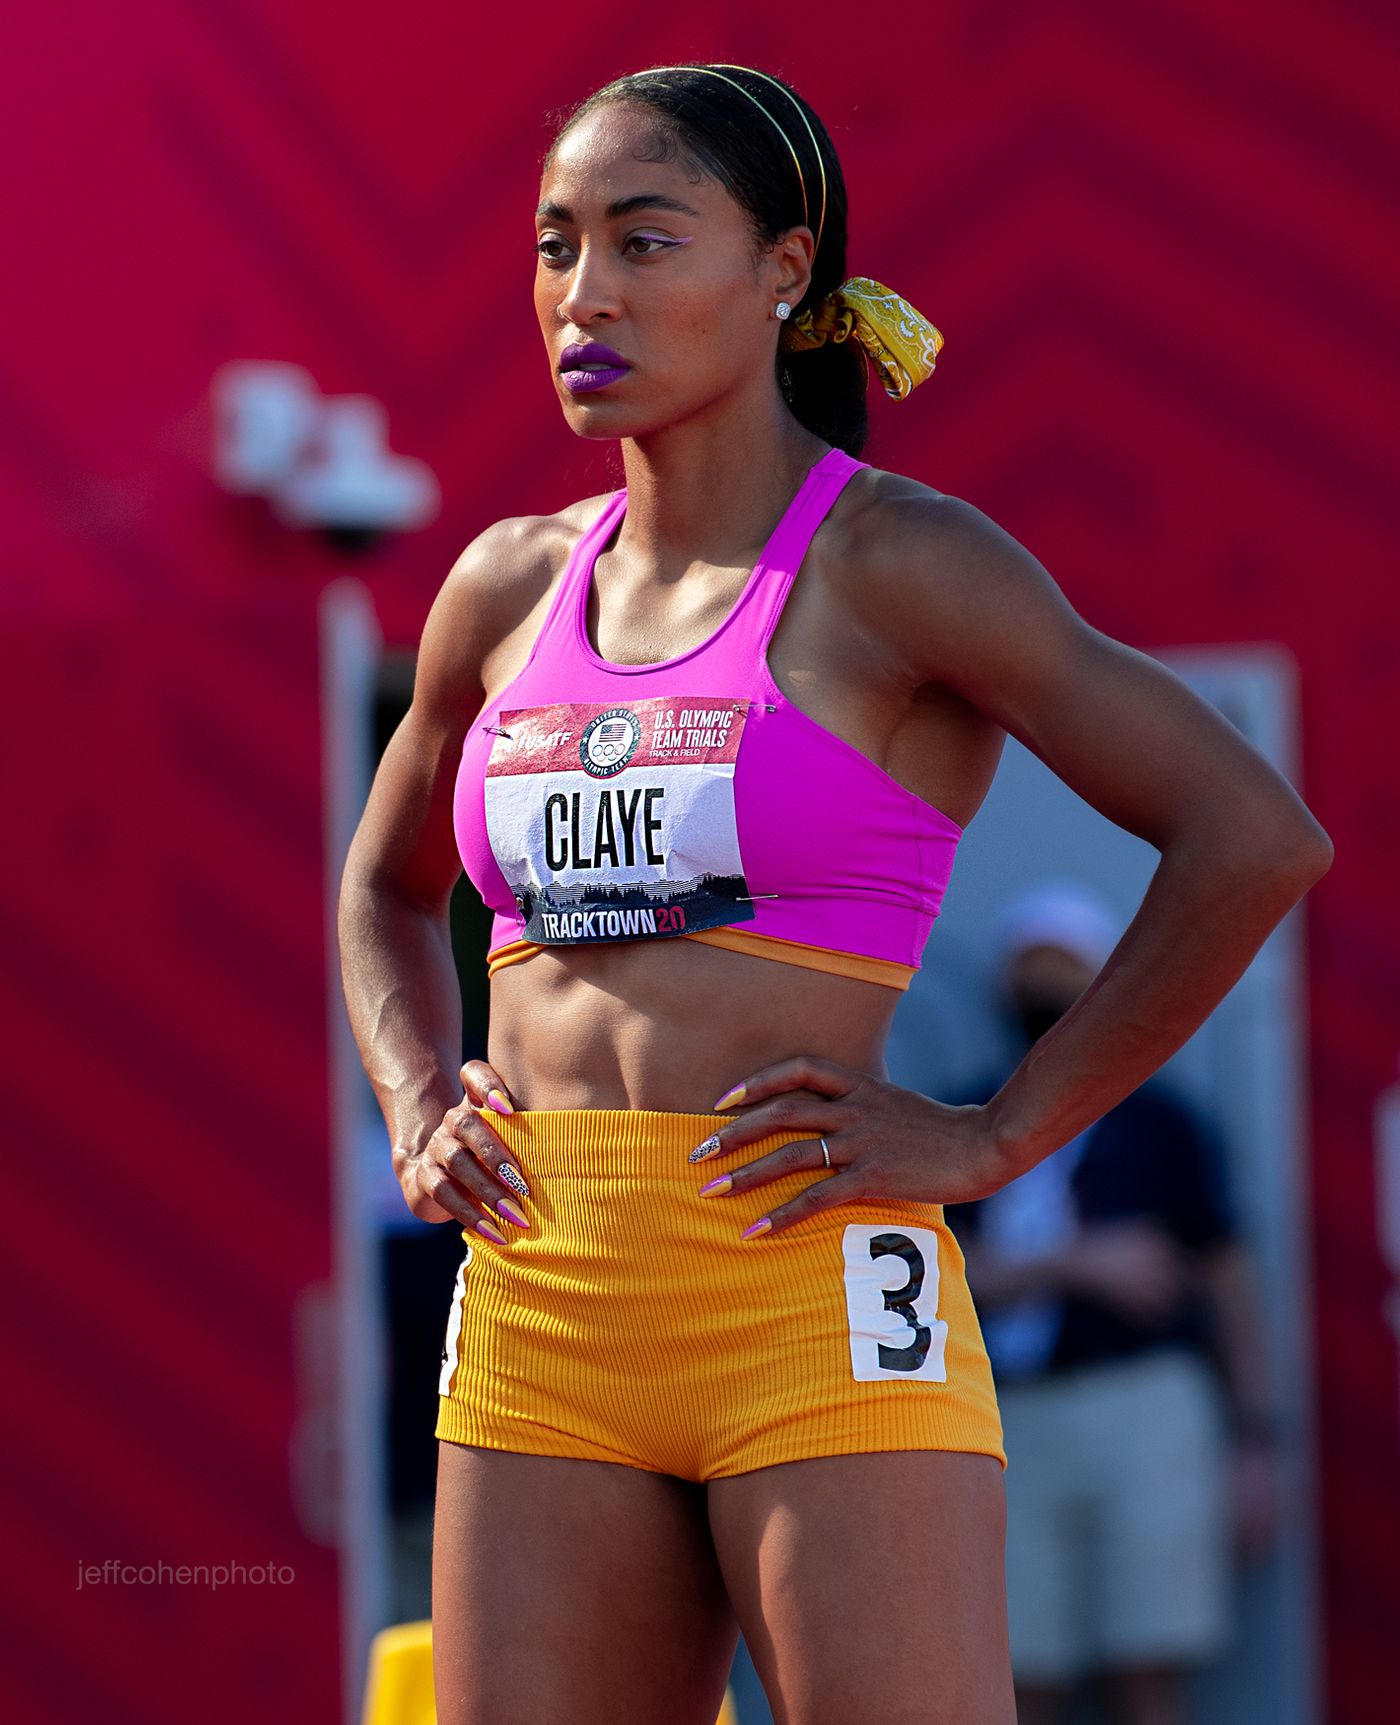 claye-100h-2021-US-Oly-Trials-day-2-437-jeff-cohen-photo--web.jpg